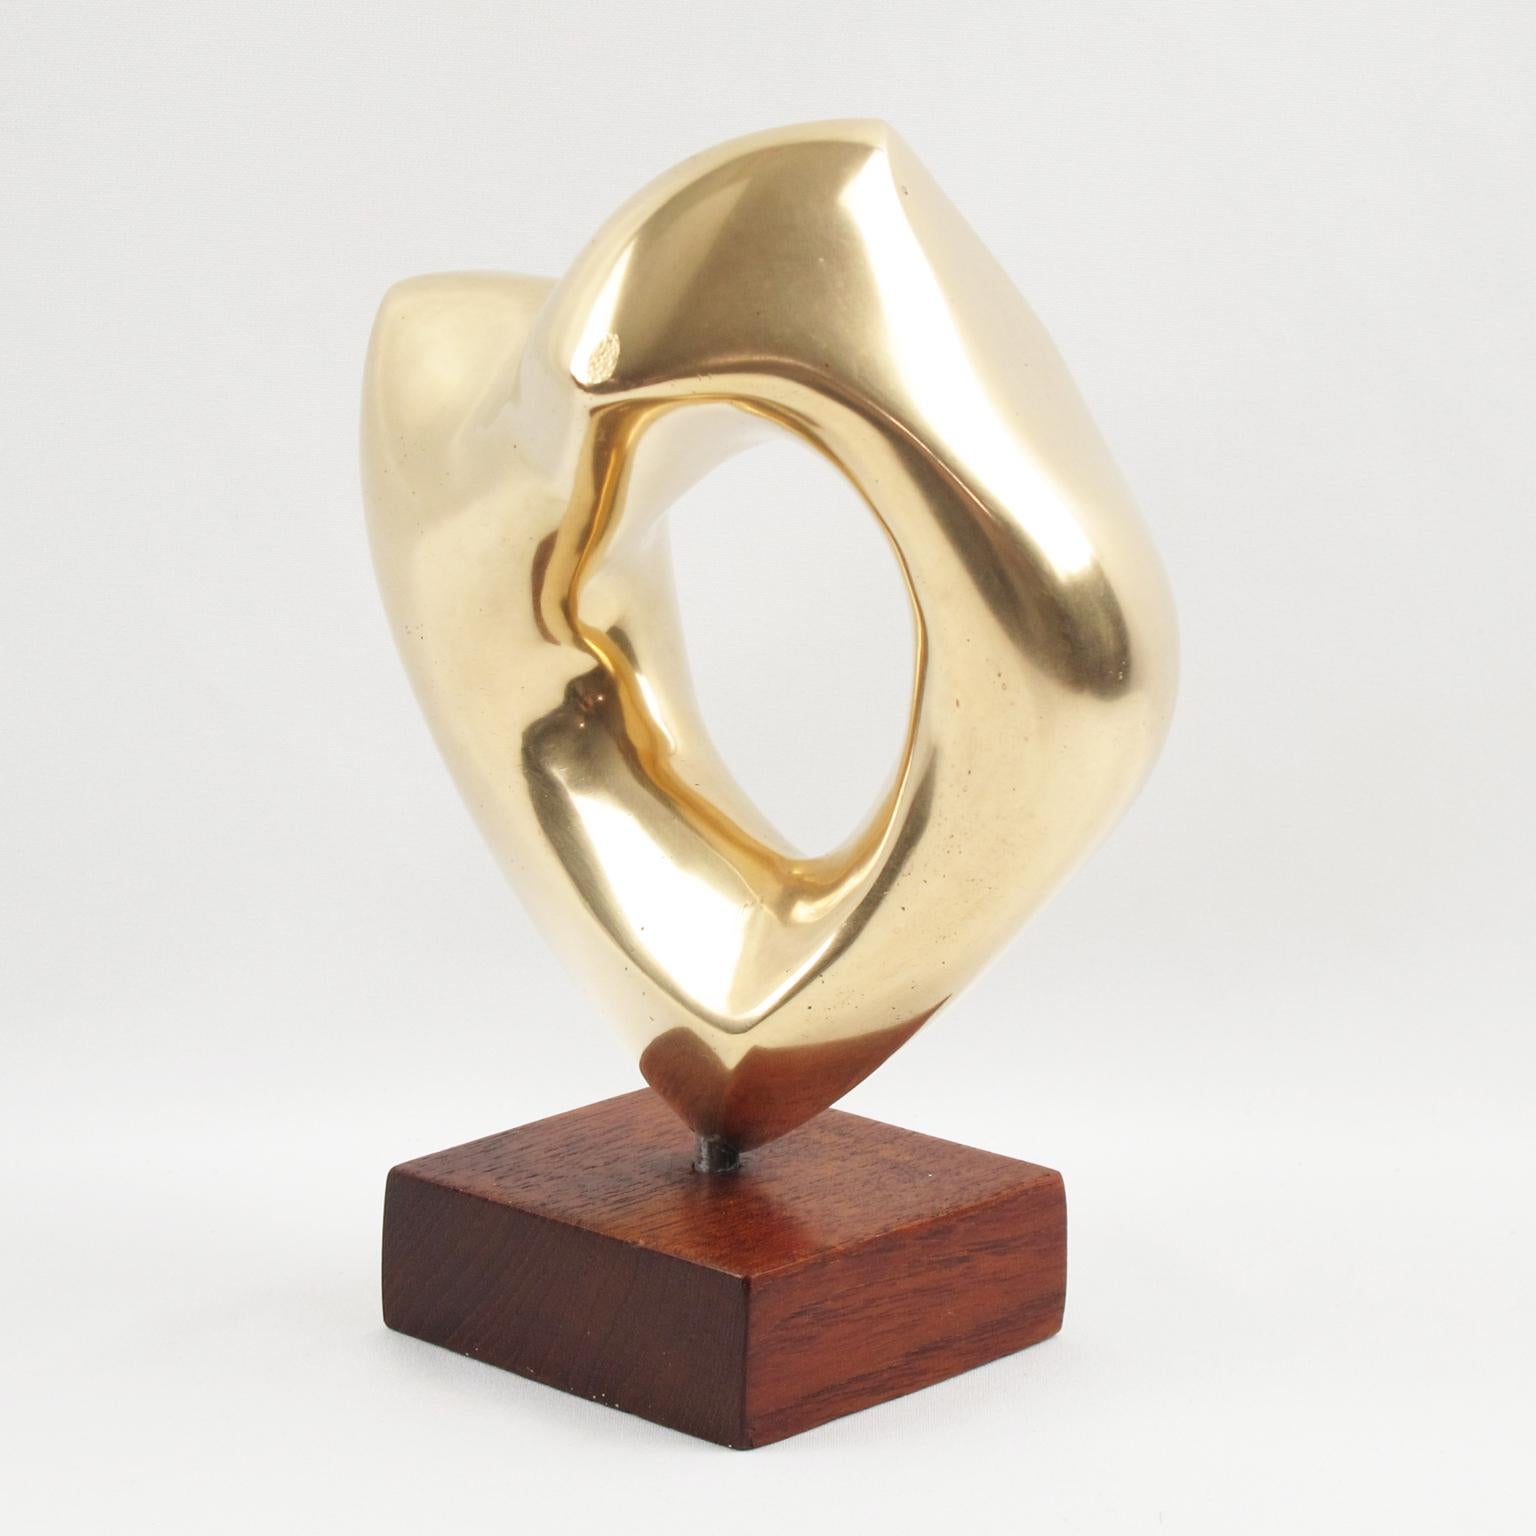 Lovely abstract bronze sculpture by G. Morleghem, Belgium, circa 1950s. Featuring an interesting organic free-form shape with polished finish. Geometric square base in mahogany. Engraved signature on side. 
Measurements: 3.94 in. wide (10 cm) x